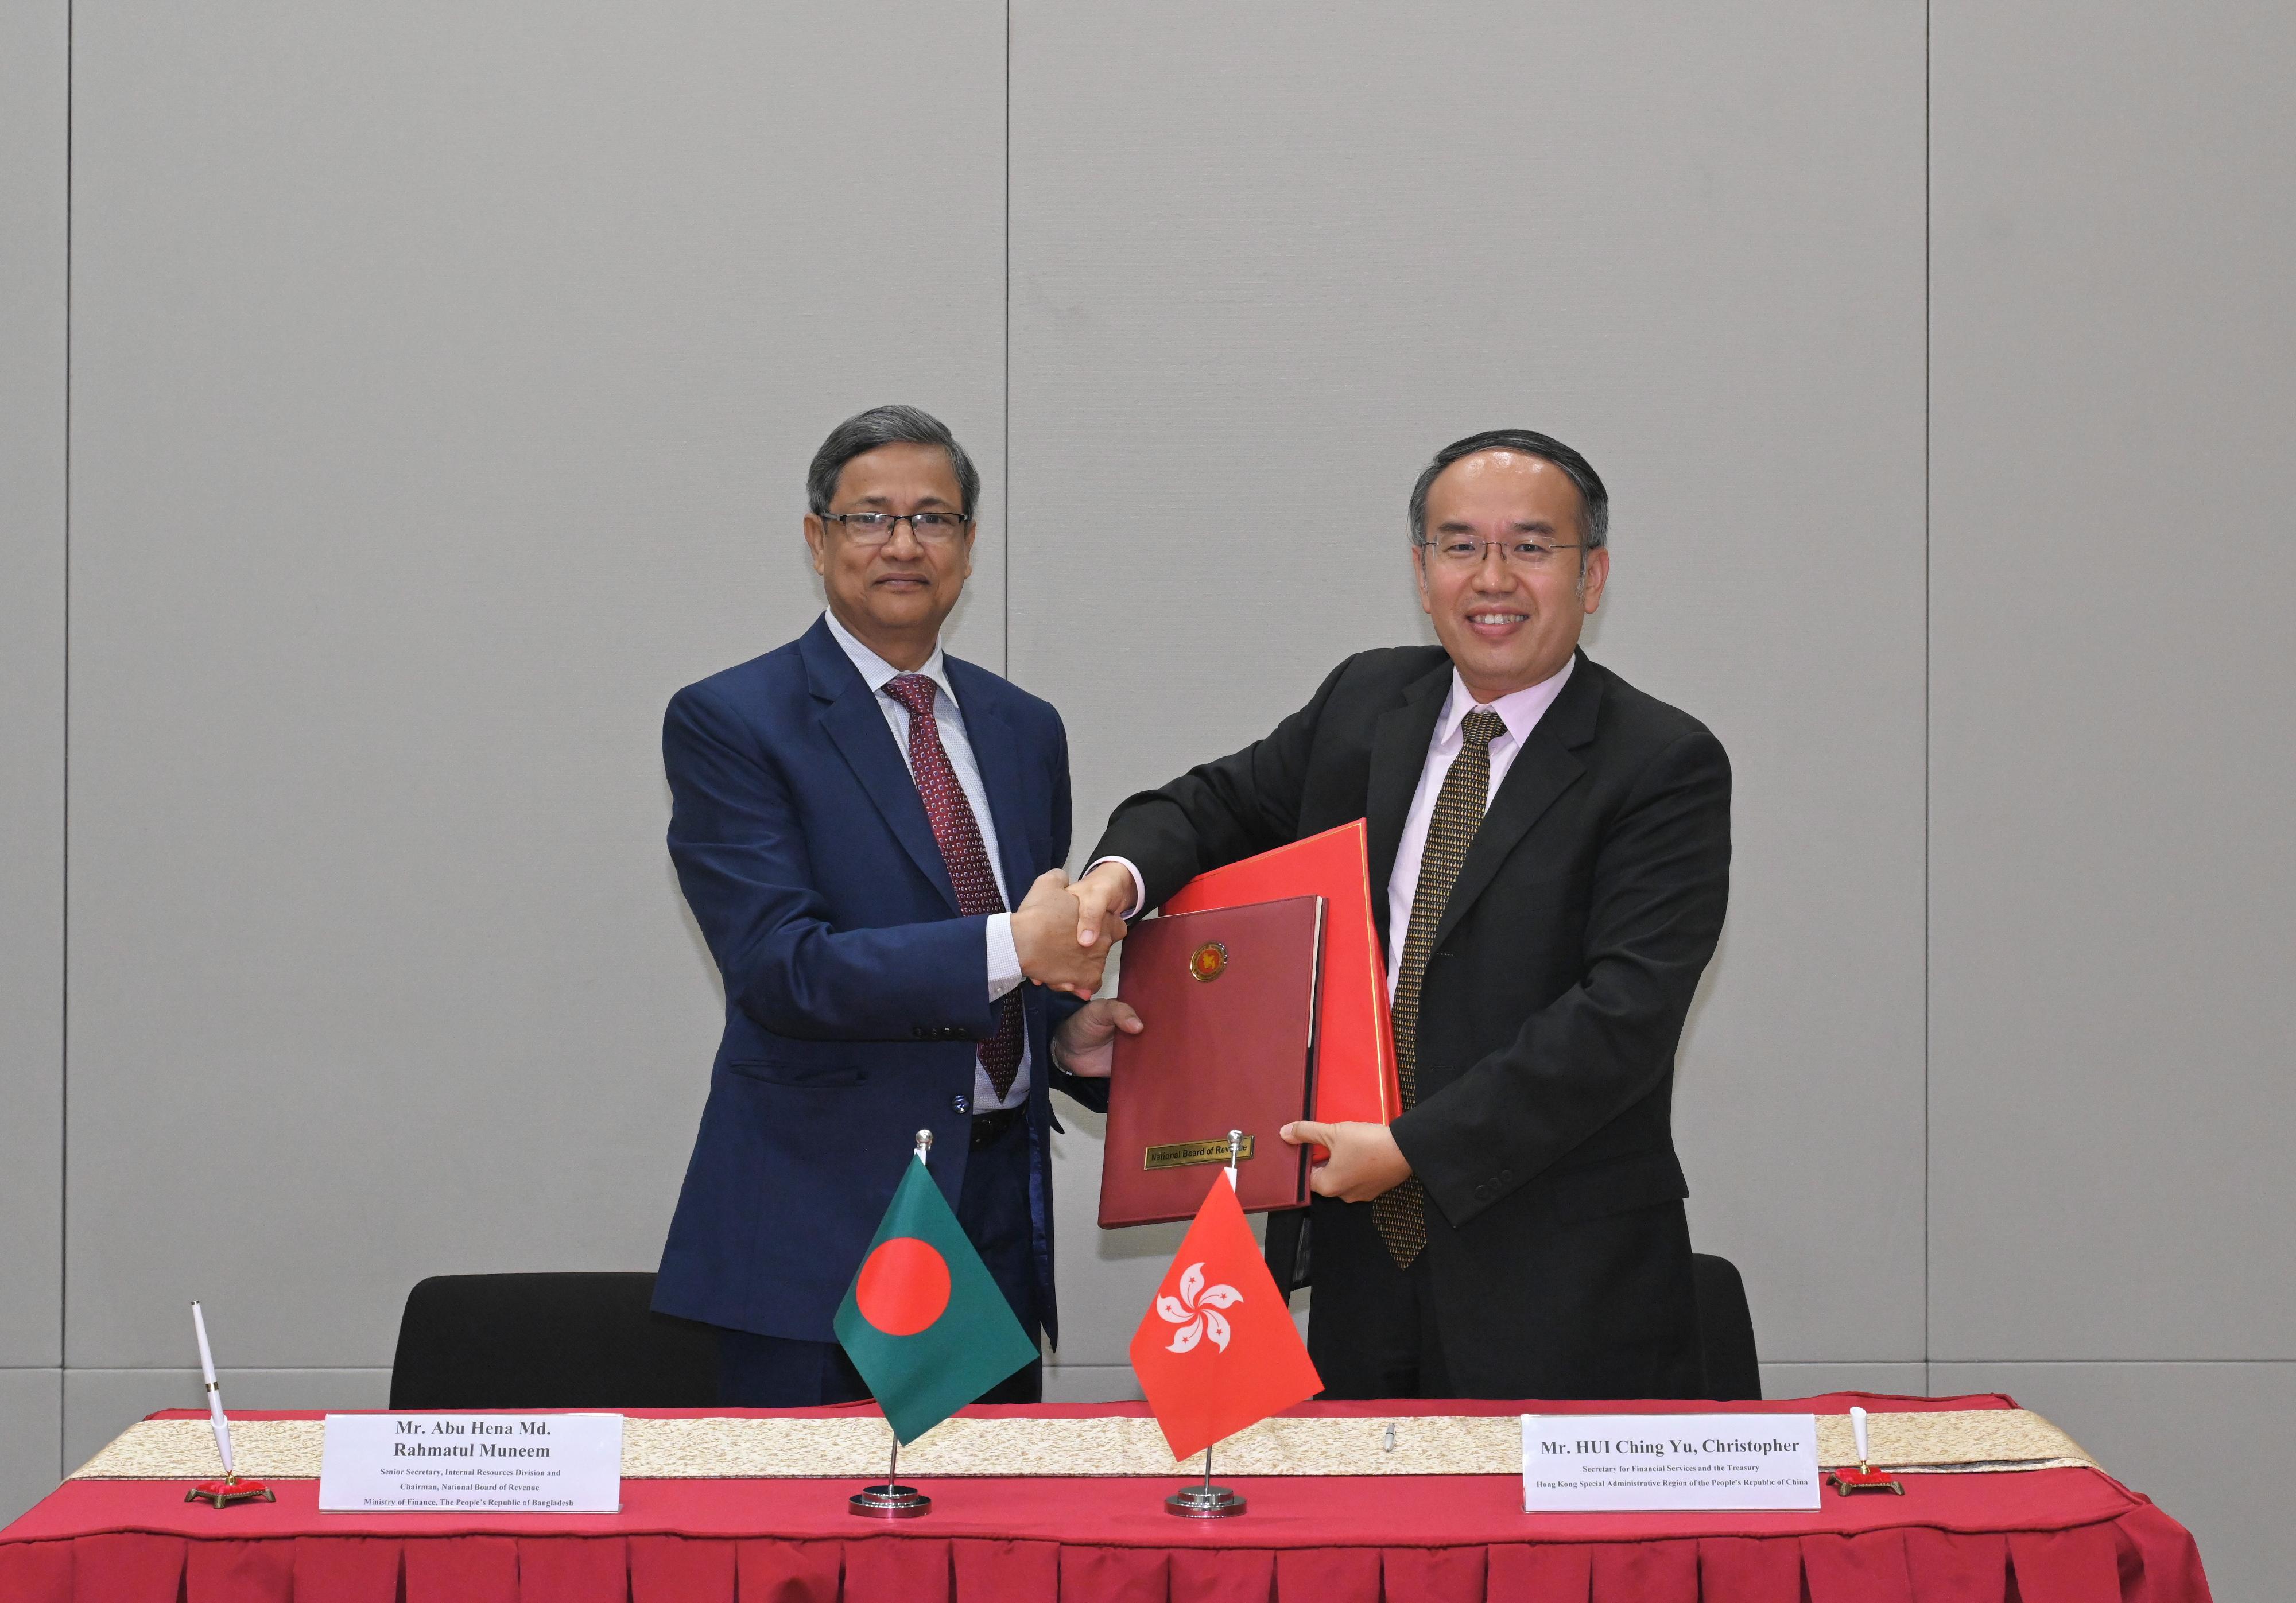 The Secretary for Financial Services and the Treasury, Mr Christopher Hui (right), exchanges documents with the Senior Secretary of the Internal Resources Division and Chairman of the National Board of Revenue of the Ministry of Finance of Bangladesh, Mr Abu Hena Md. Rahmatul Muneem (left), after signing a comprehensive avoidance of double taxation agreement today (August 30).